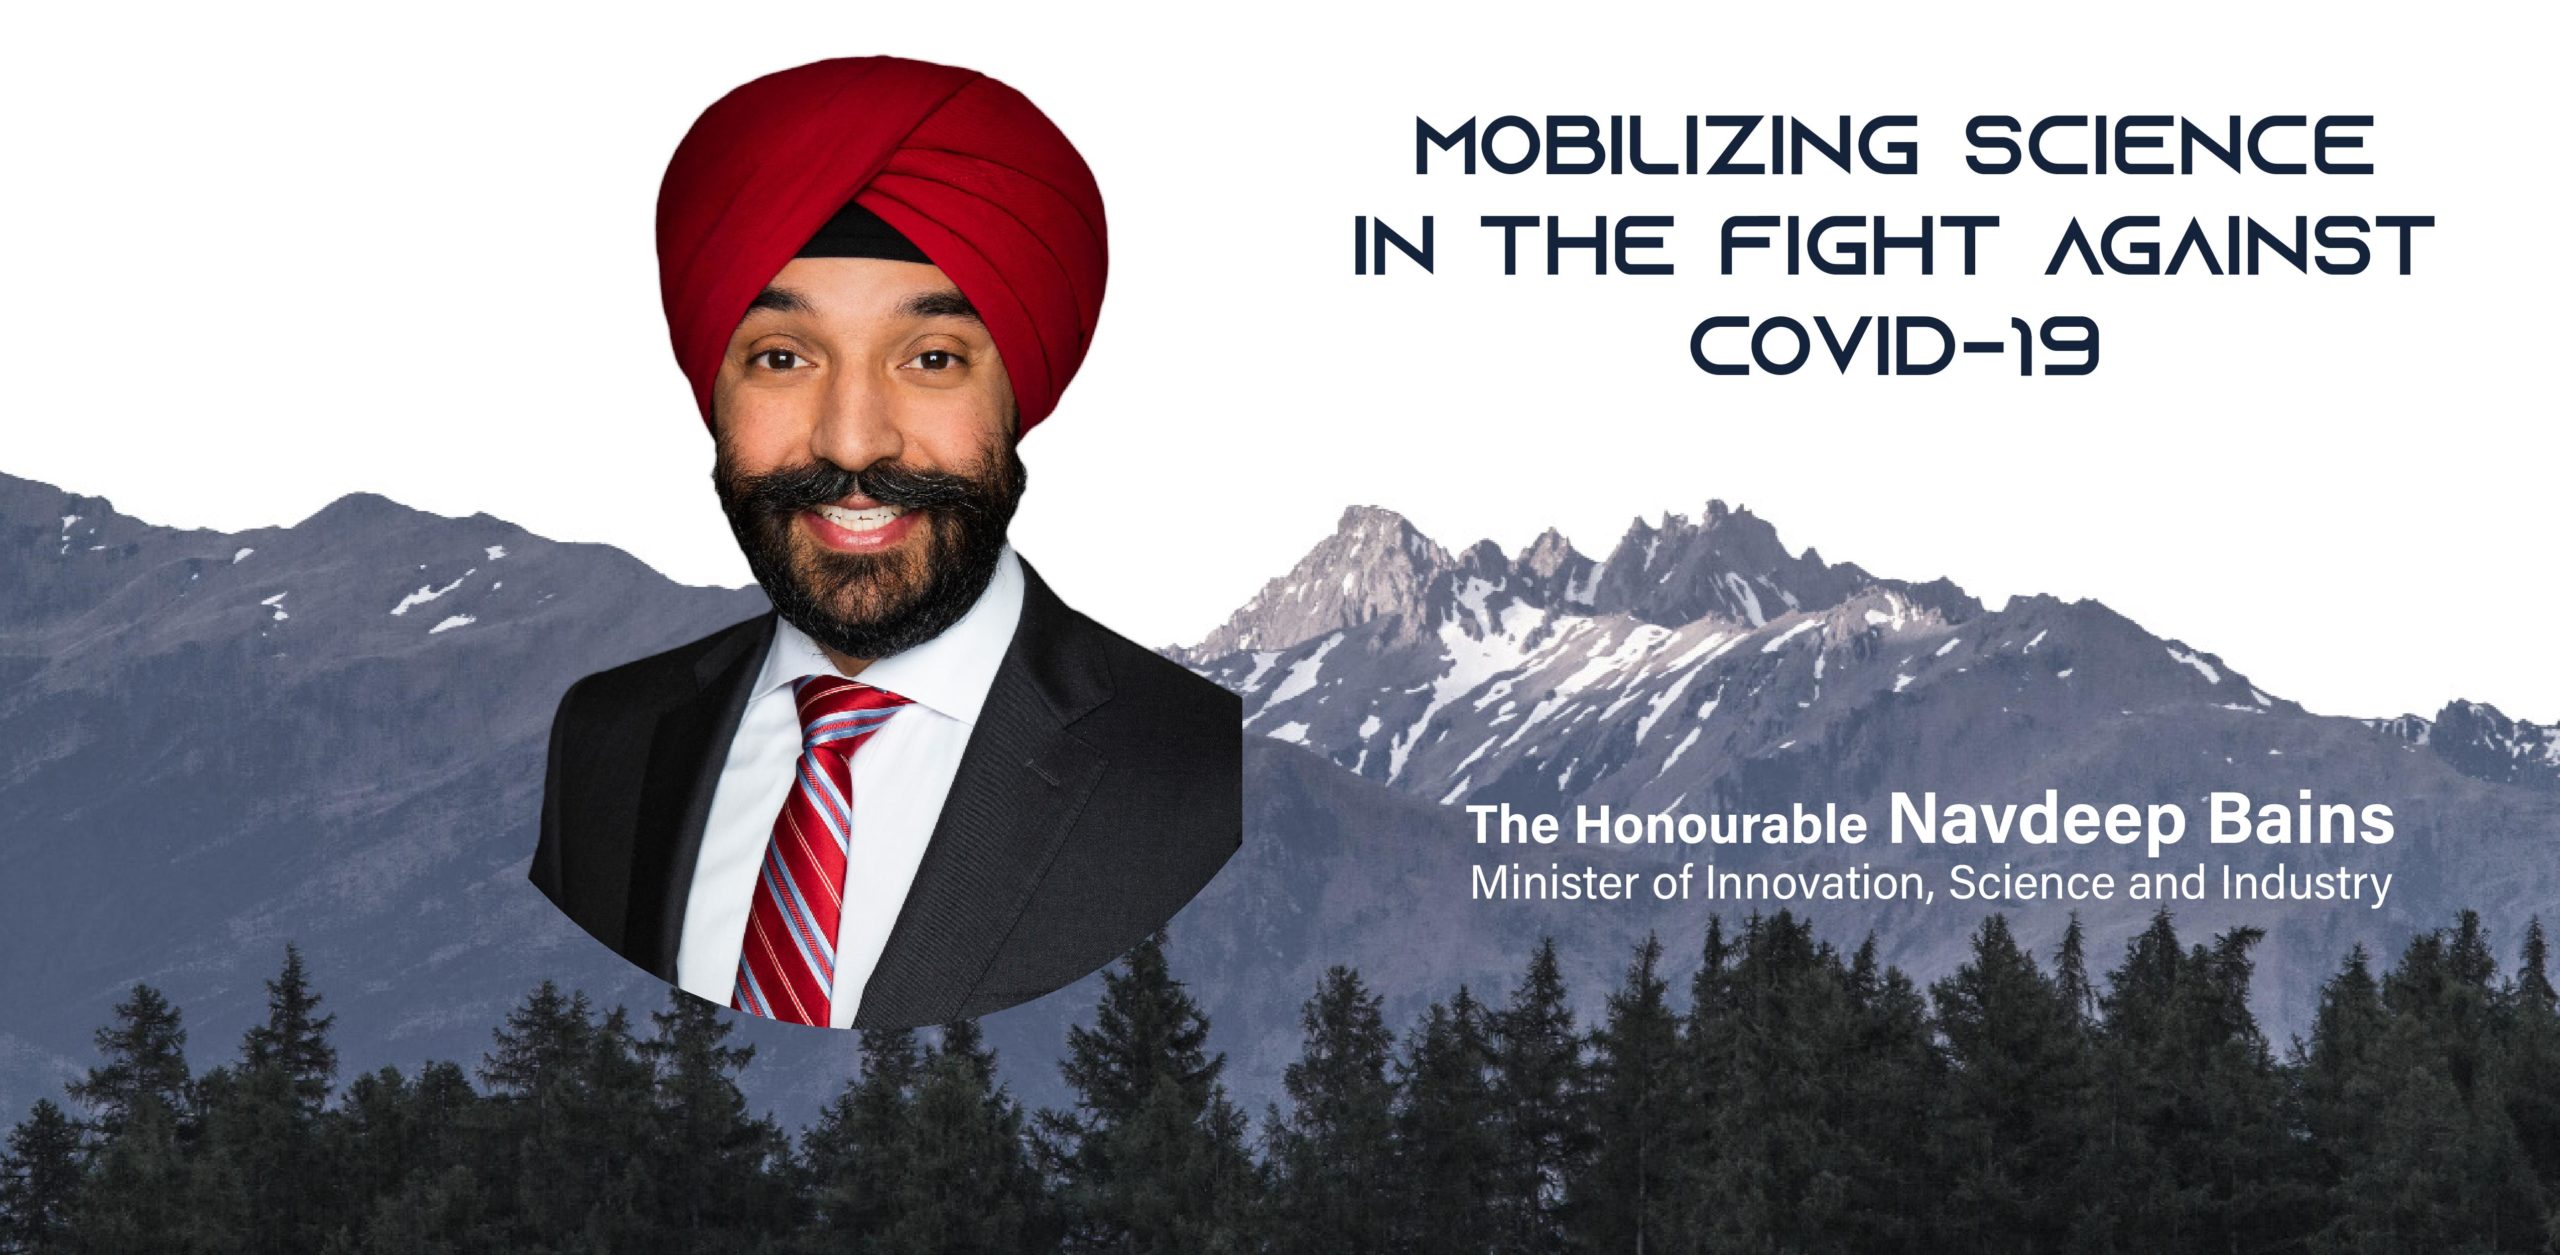 A picture of a Sikh man over a mountain landscape with the text: Mobilizing science in the fight against covid-19 The Honourable Navdeep Bains Minister of Innovation, Science and Industry